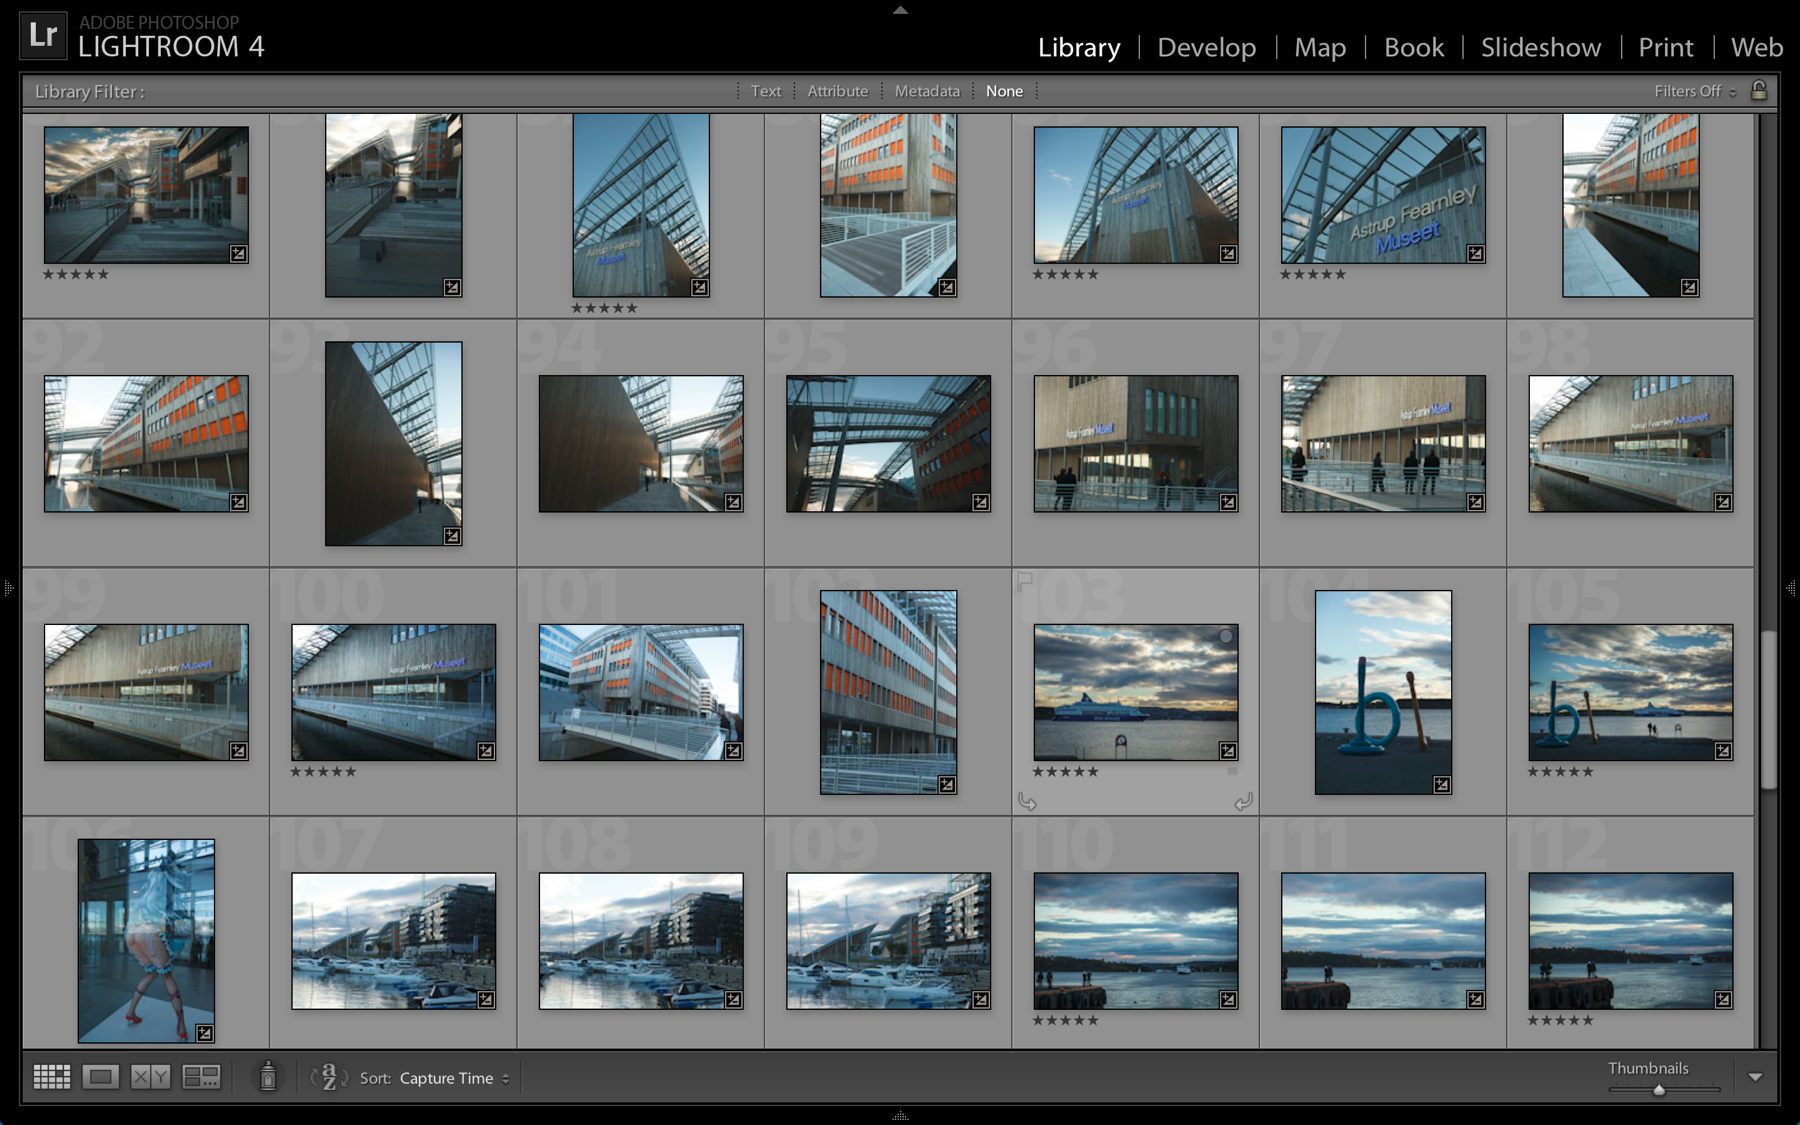 Lightroom Adds Retina Display Support in the Develop Module